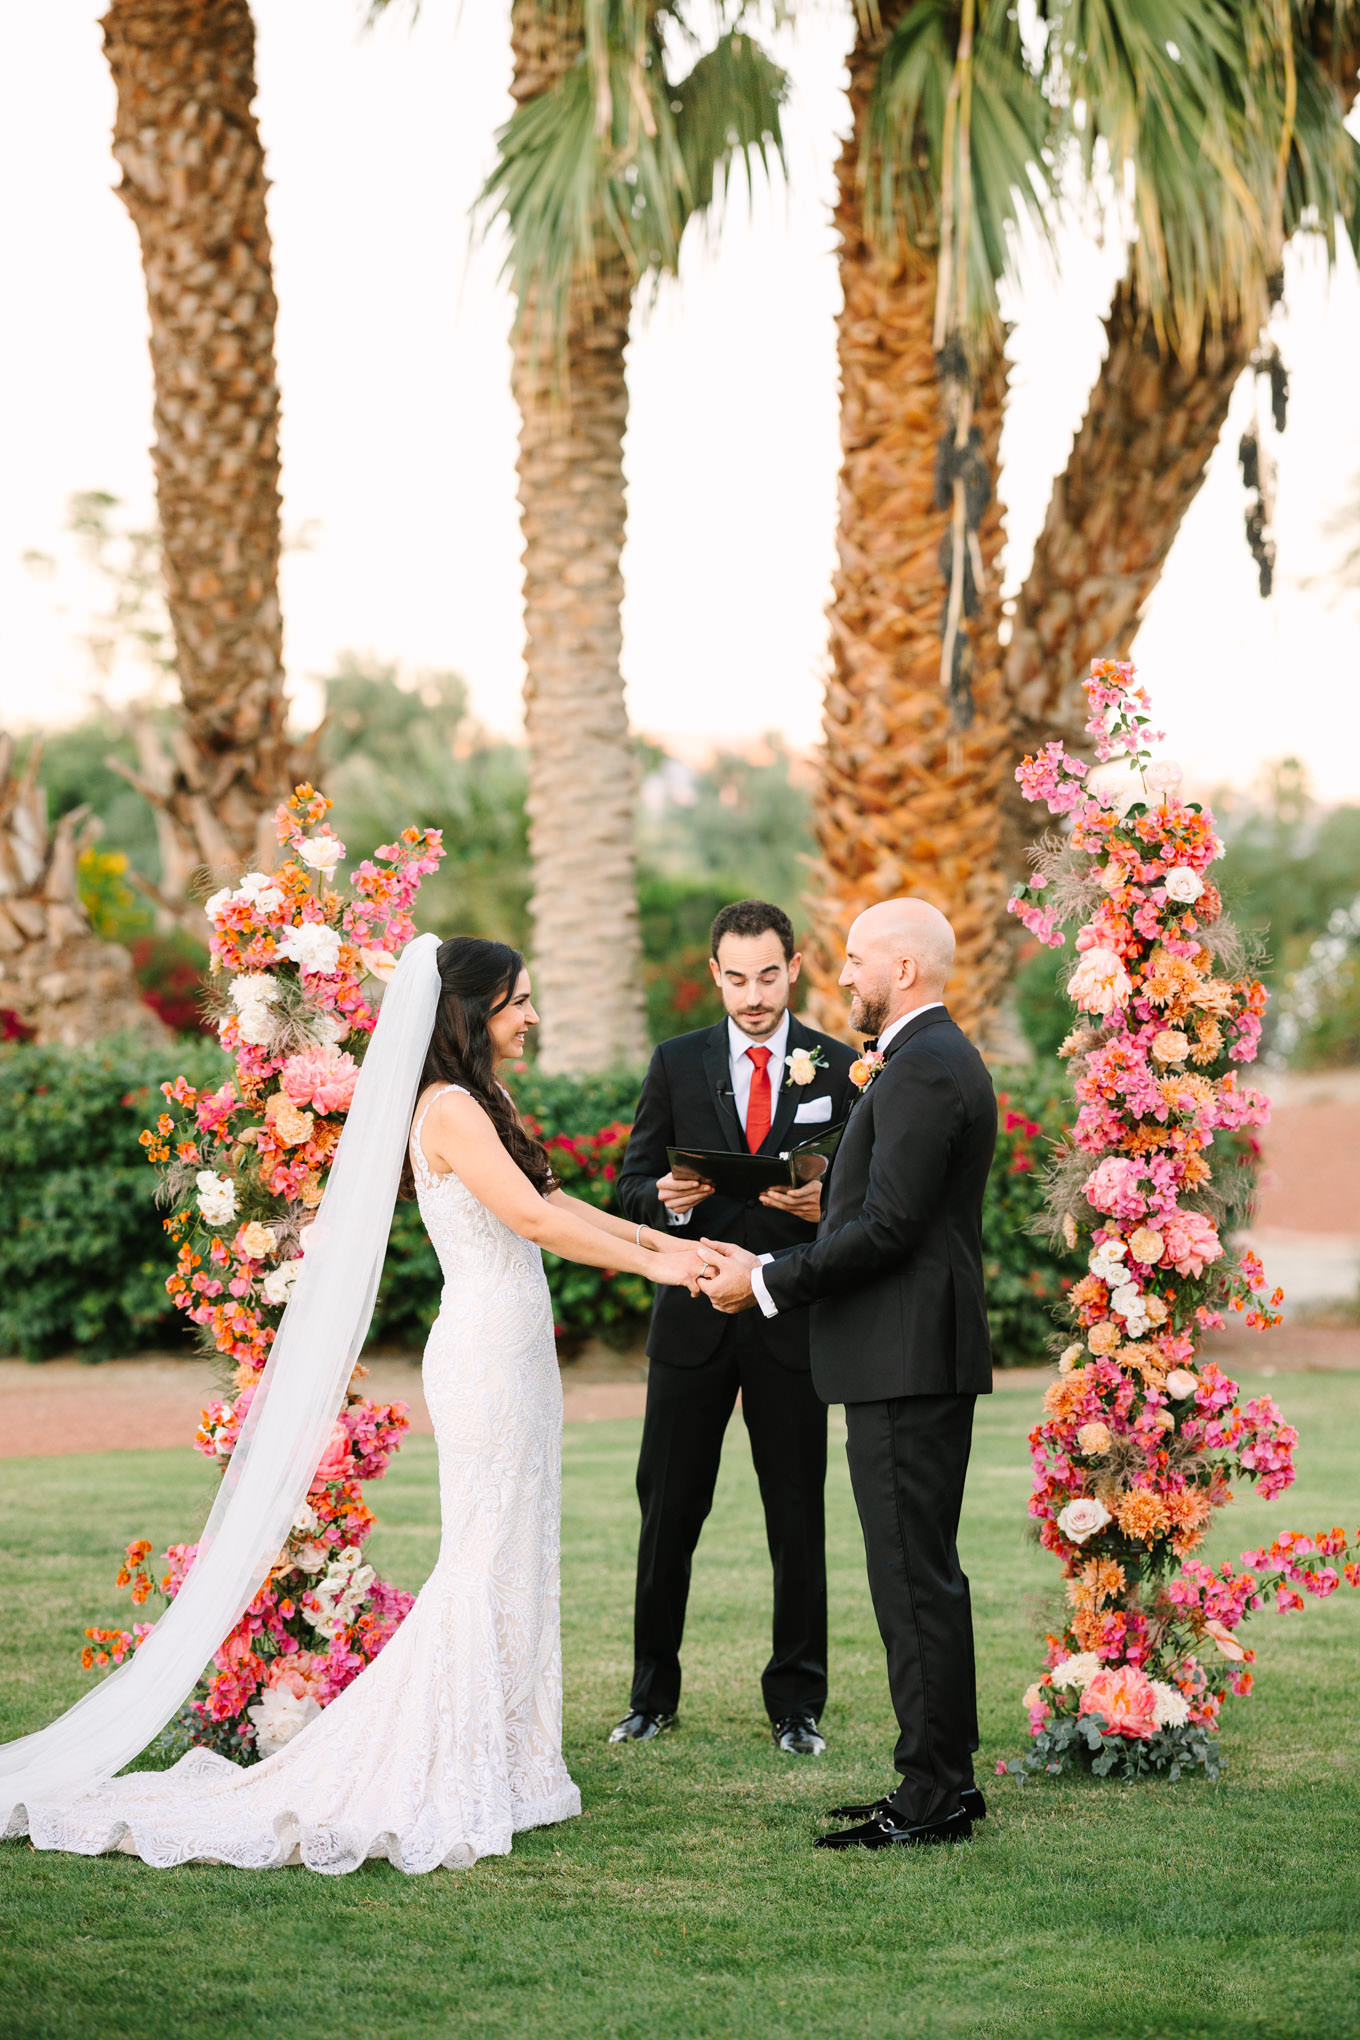 Wedding ceremony | Pink Bougainvillea Estate wedding | Colorful LA wedding photography | #bougainvilleaestate #palmspringswedding #palmspringsweddingvenue #palmspringsphotographer Source: Mary Costa Photography | Los Angeles